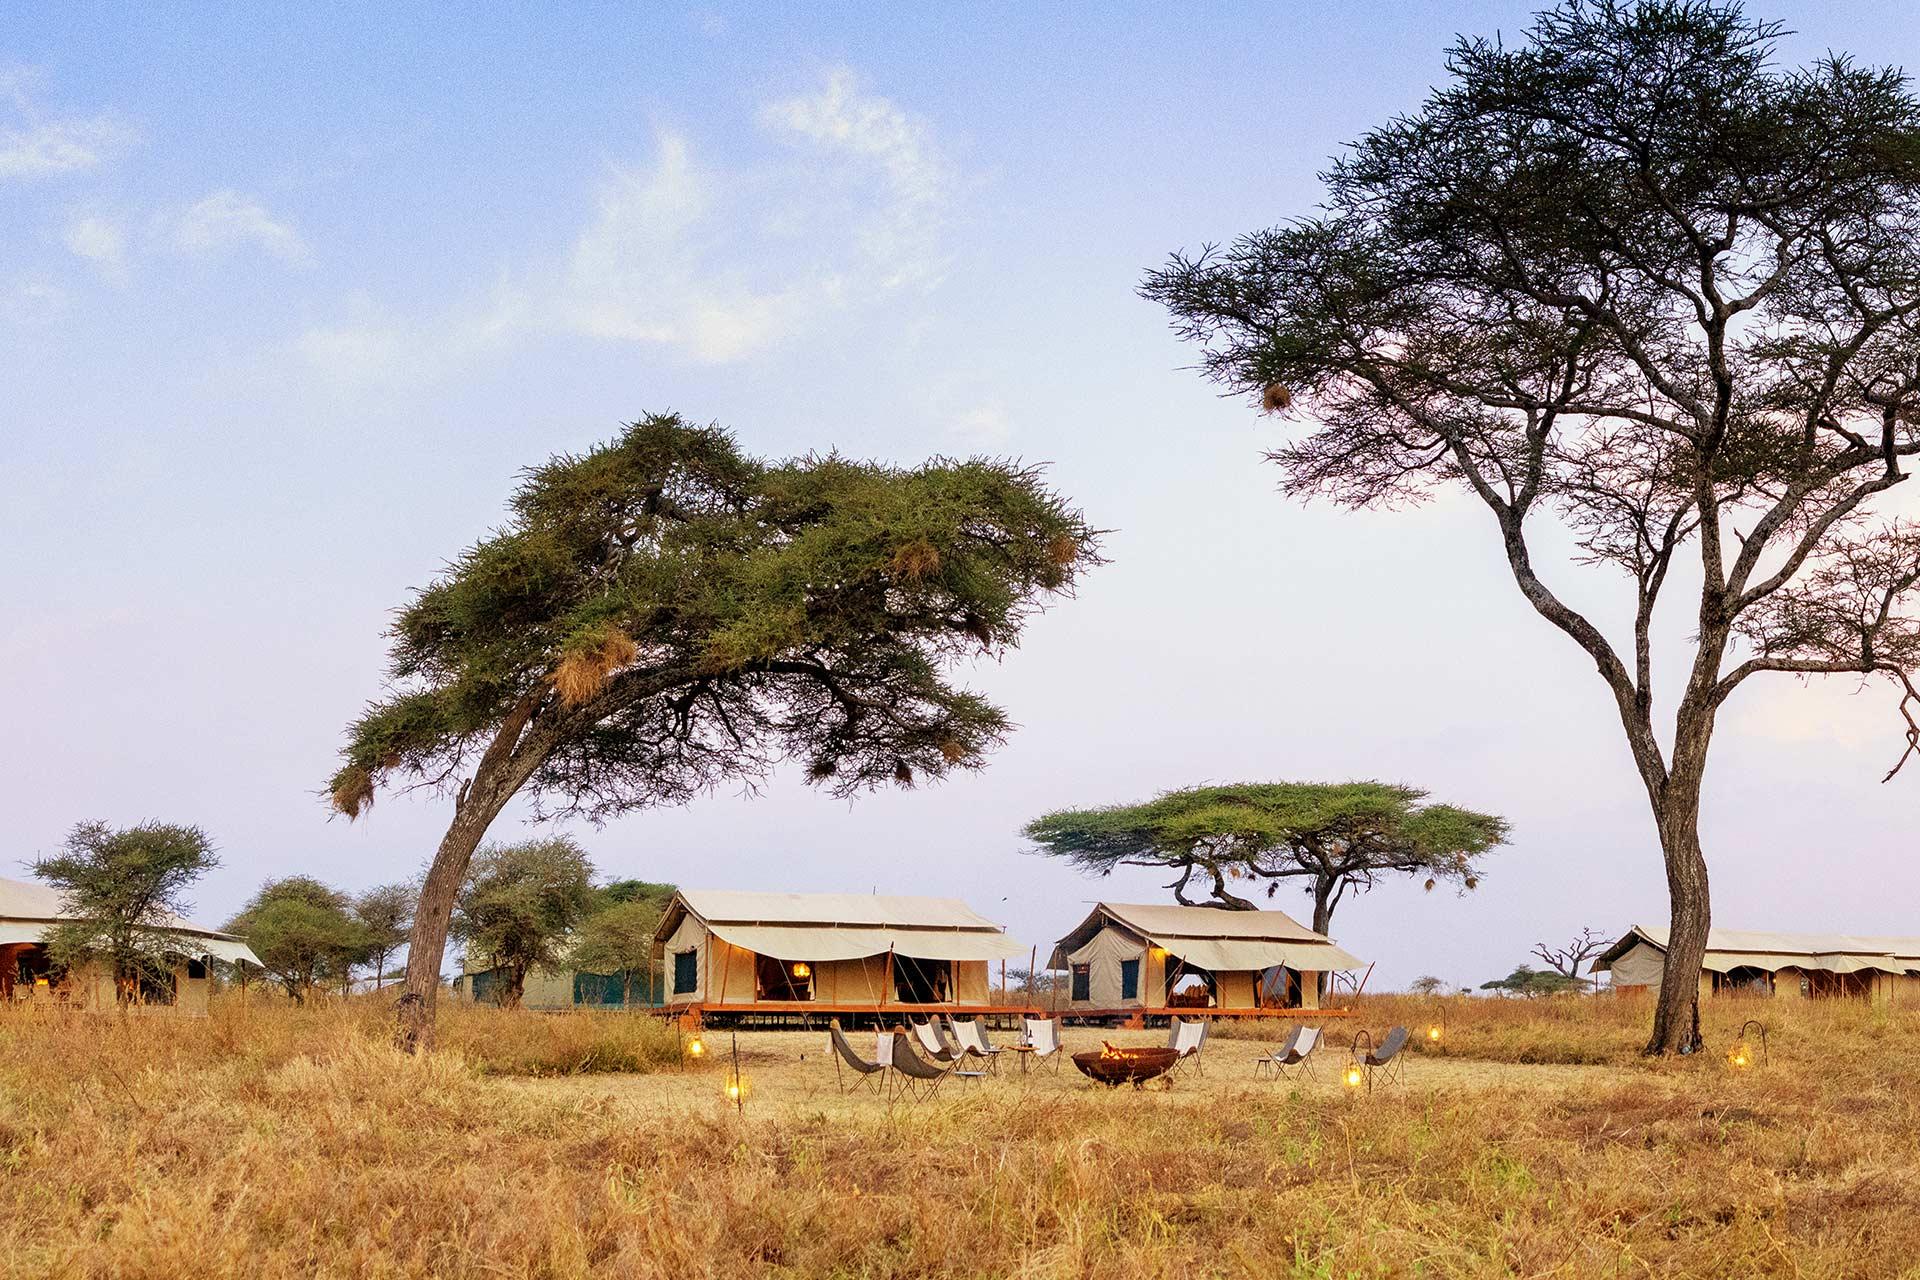 The Siringit Serengeti Camp by Mantis is located under a canopy of Tortillas Acacia trees along the wildlife migration trails. 